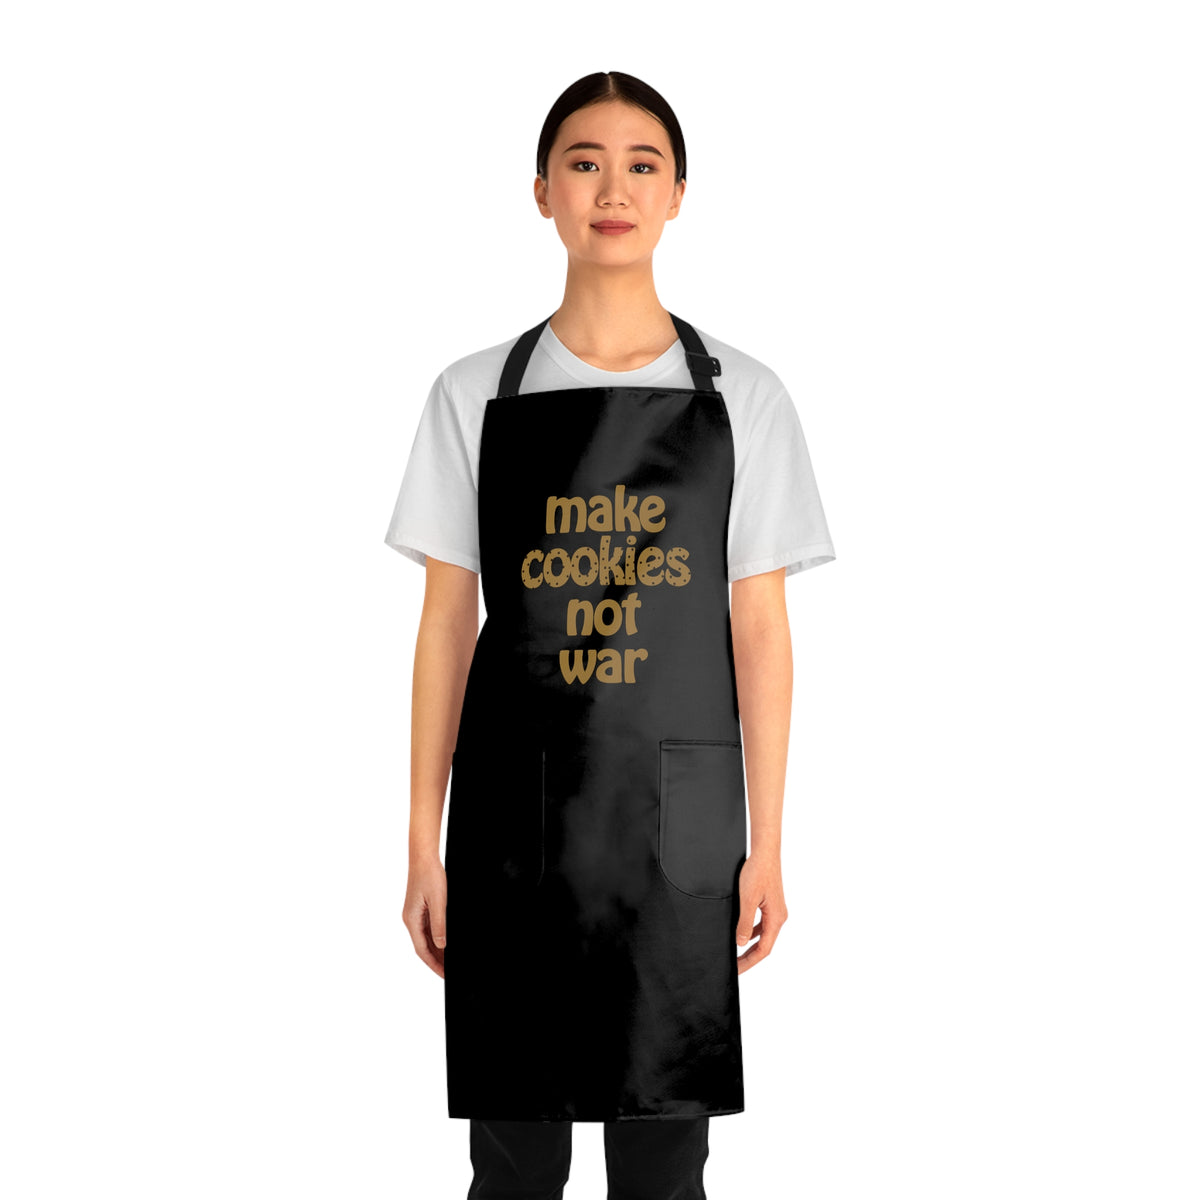 front view of a girl wear a black apron with two pockets that says "make cookies not war"